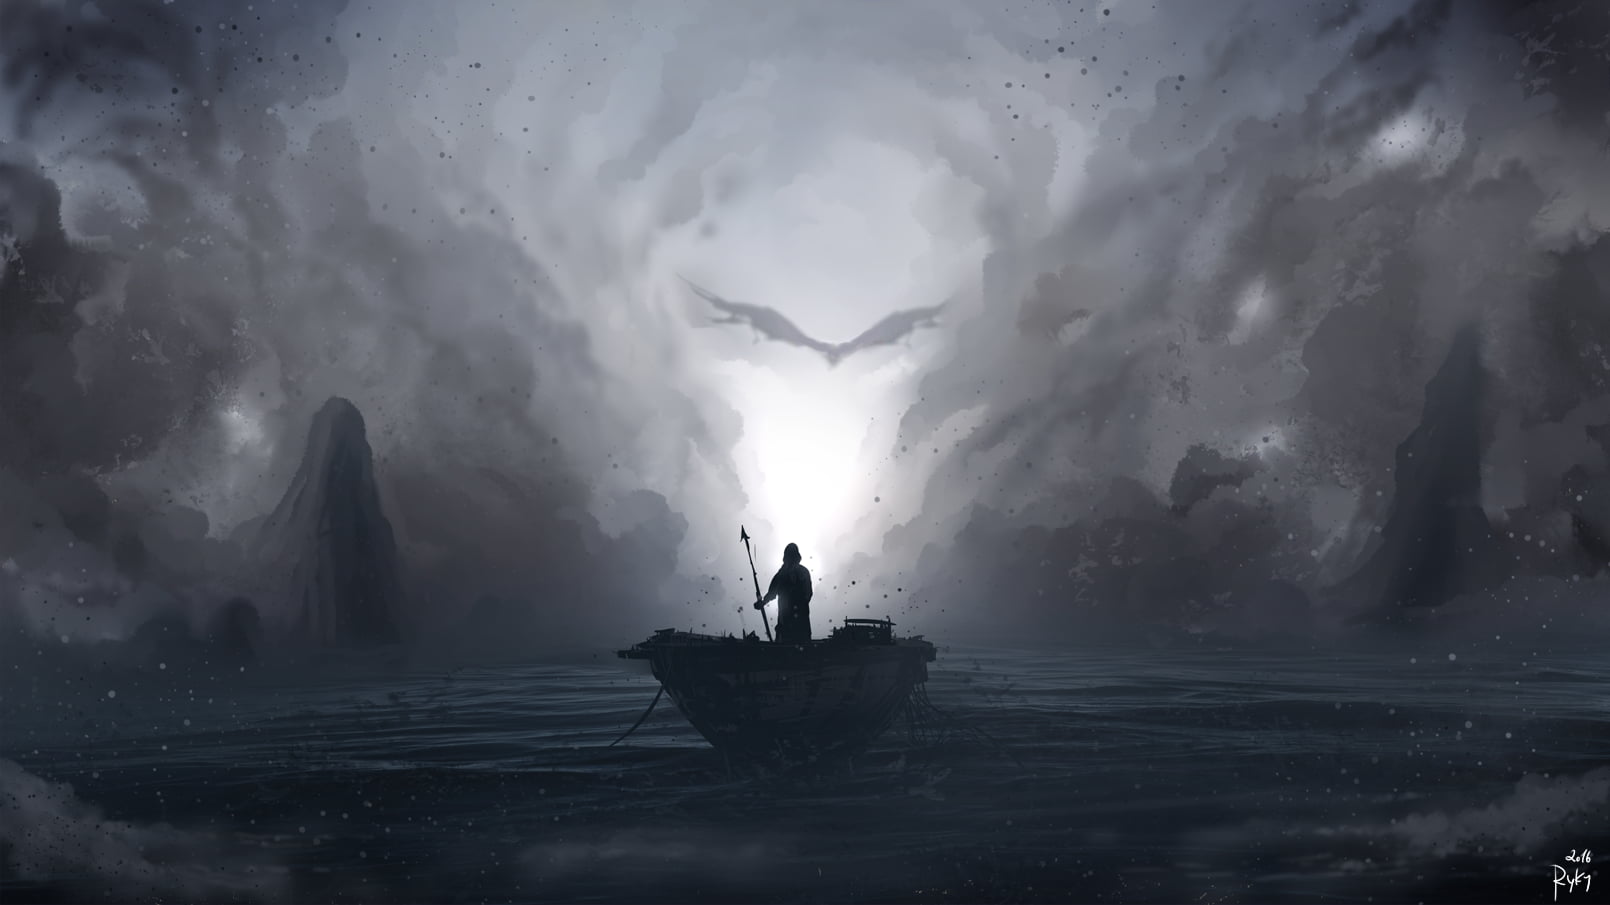 person on boat painting, digital art, landscape, dragon, drawing